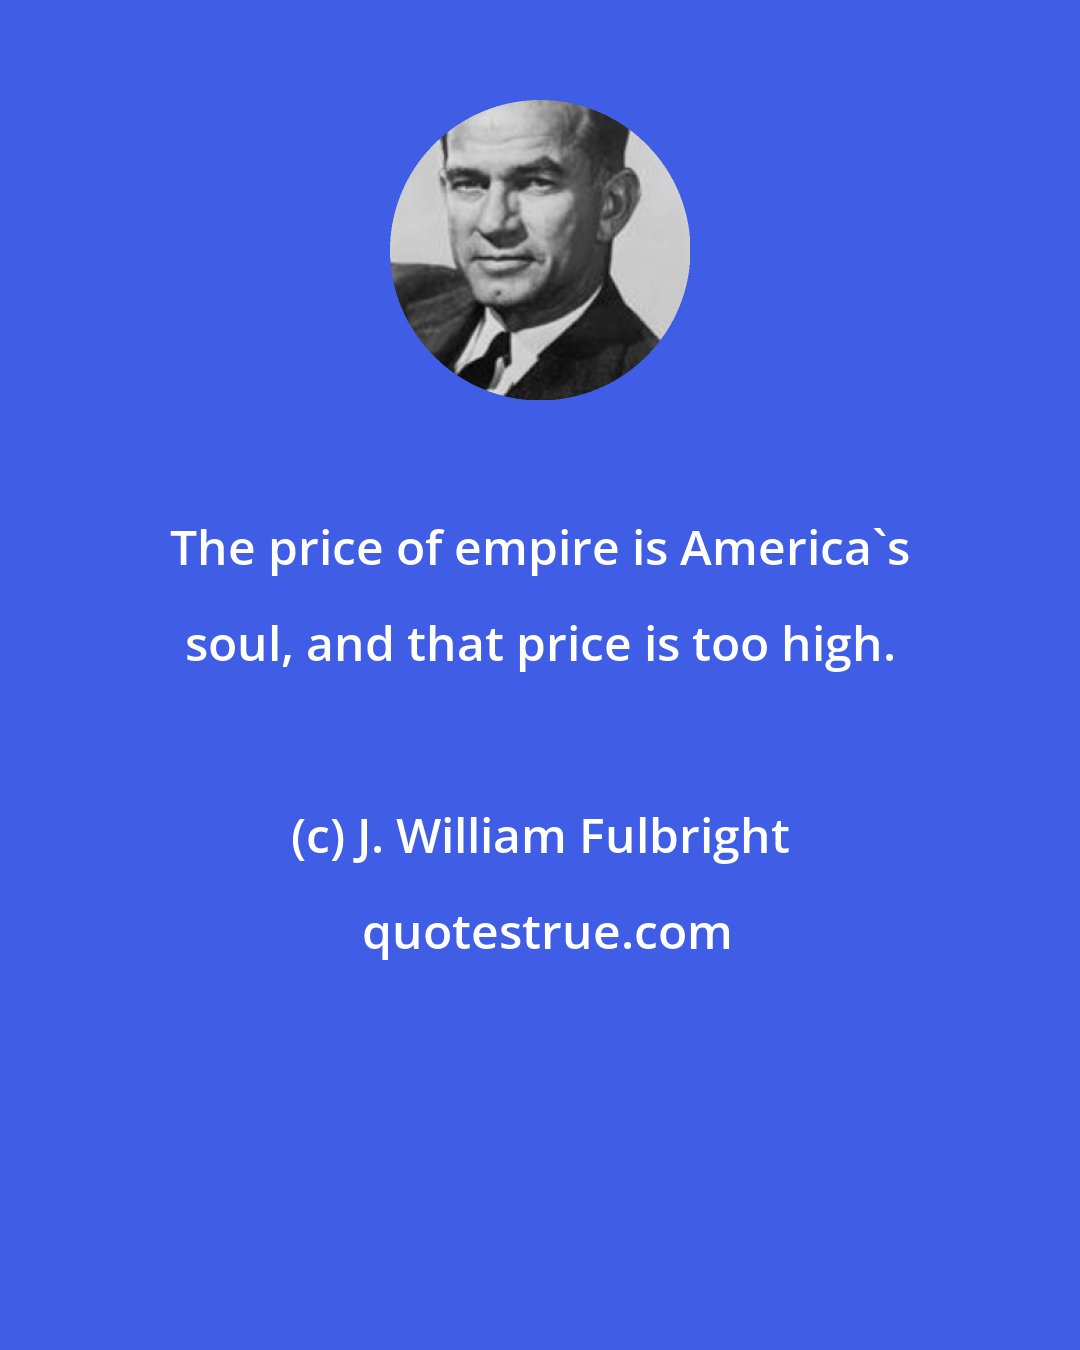 J. William Fulbright: The price of empire is America's soul, and that price is too high.